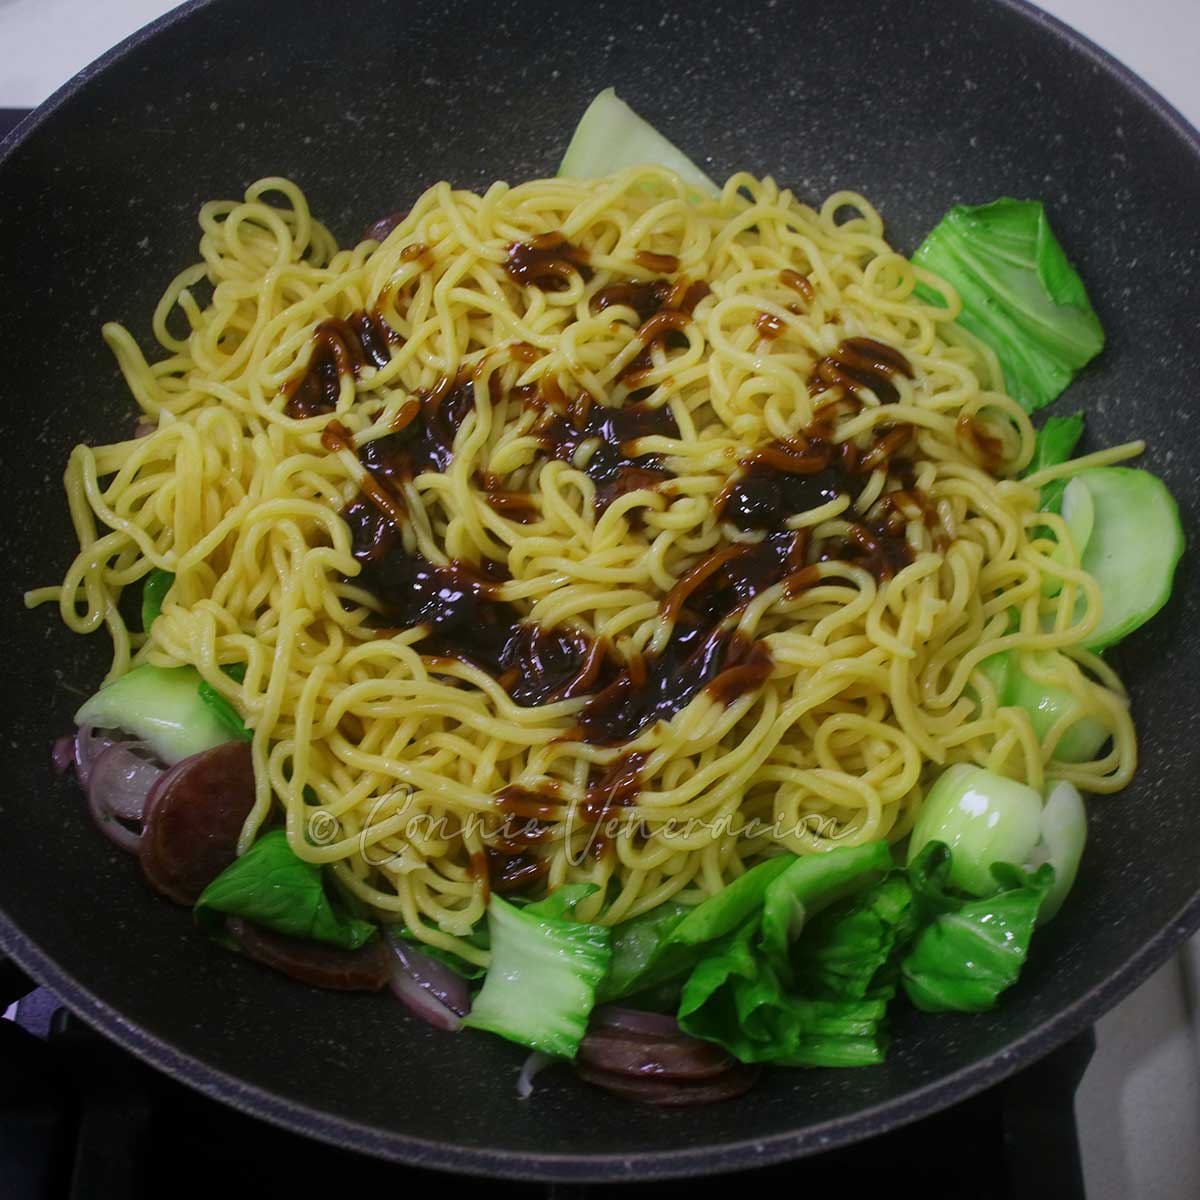 Stir fried noodles, Chinese sausage and bok choy